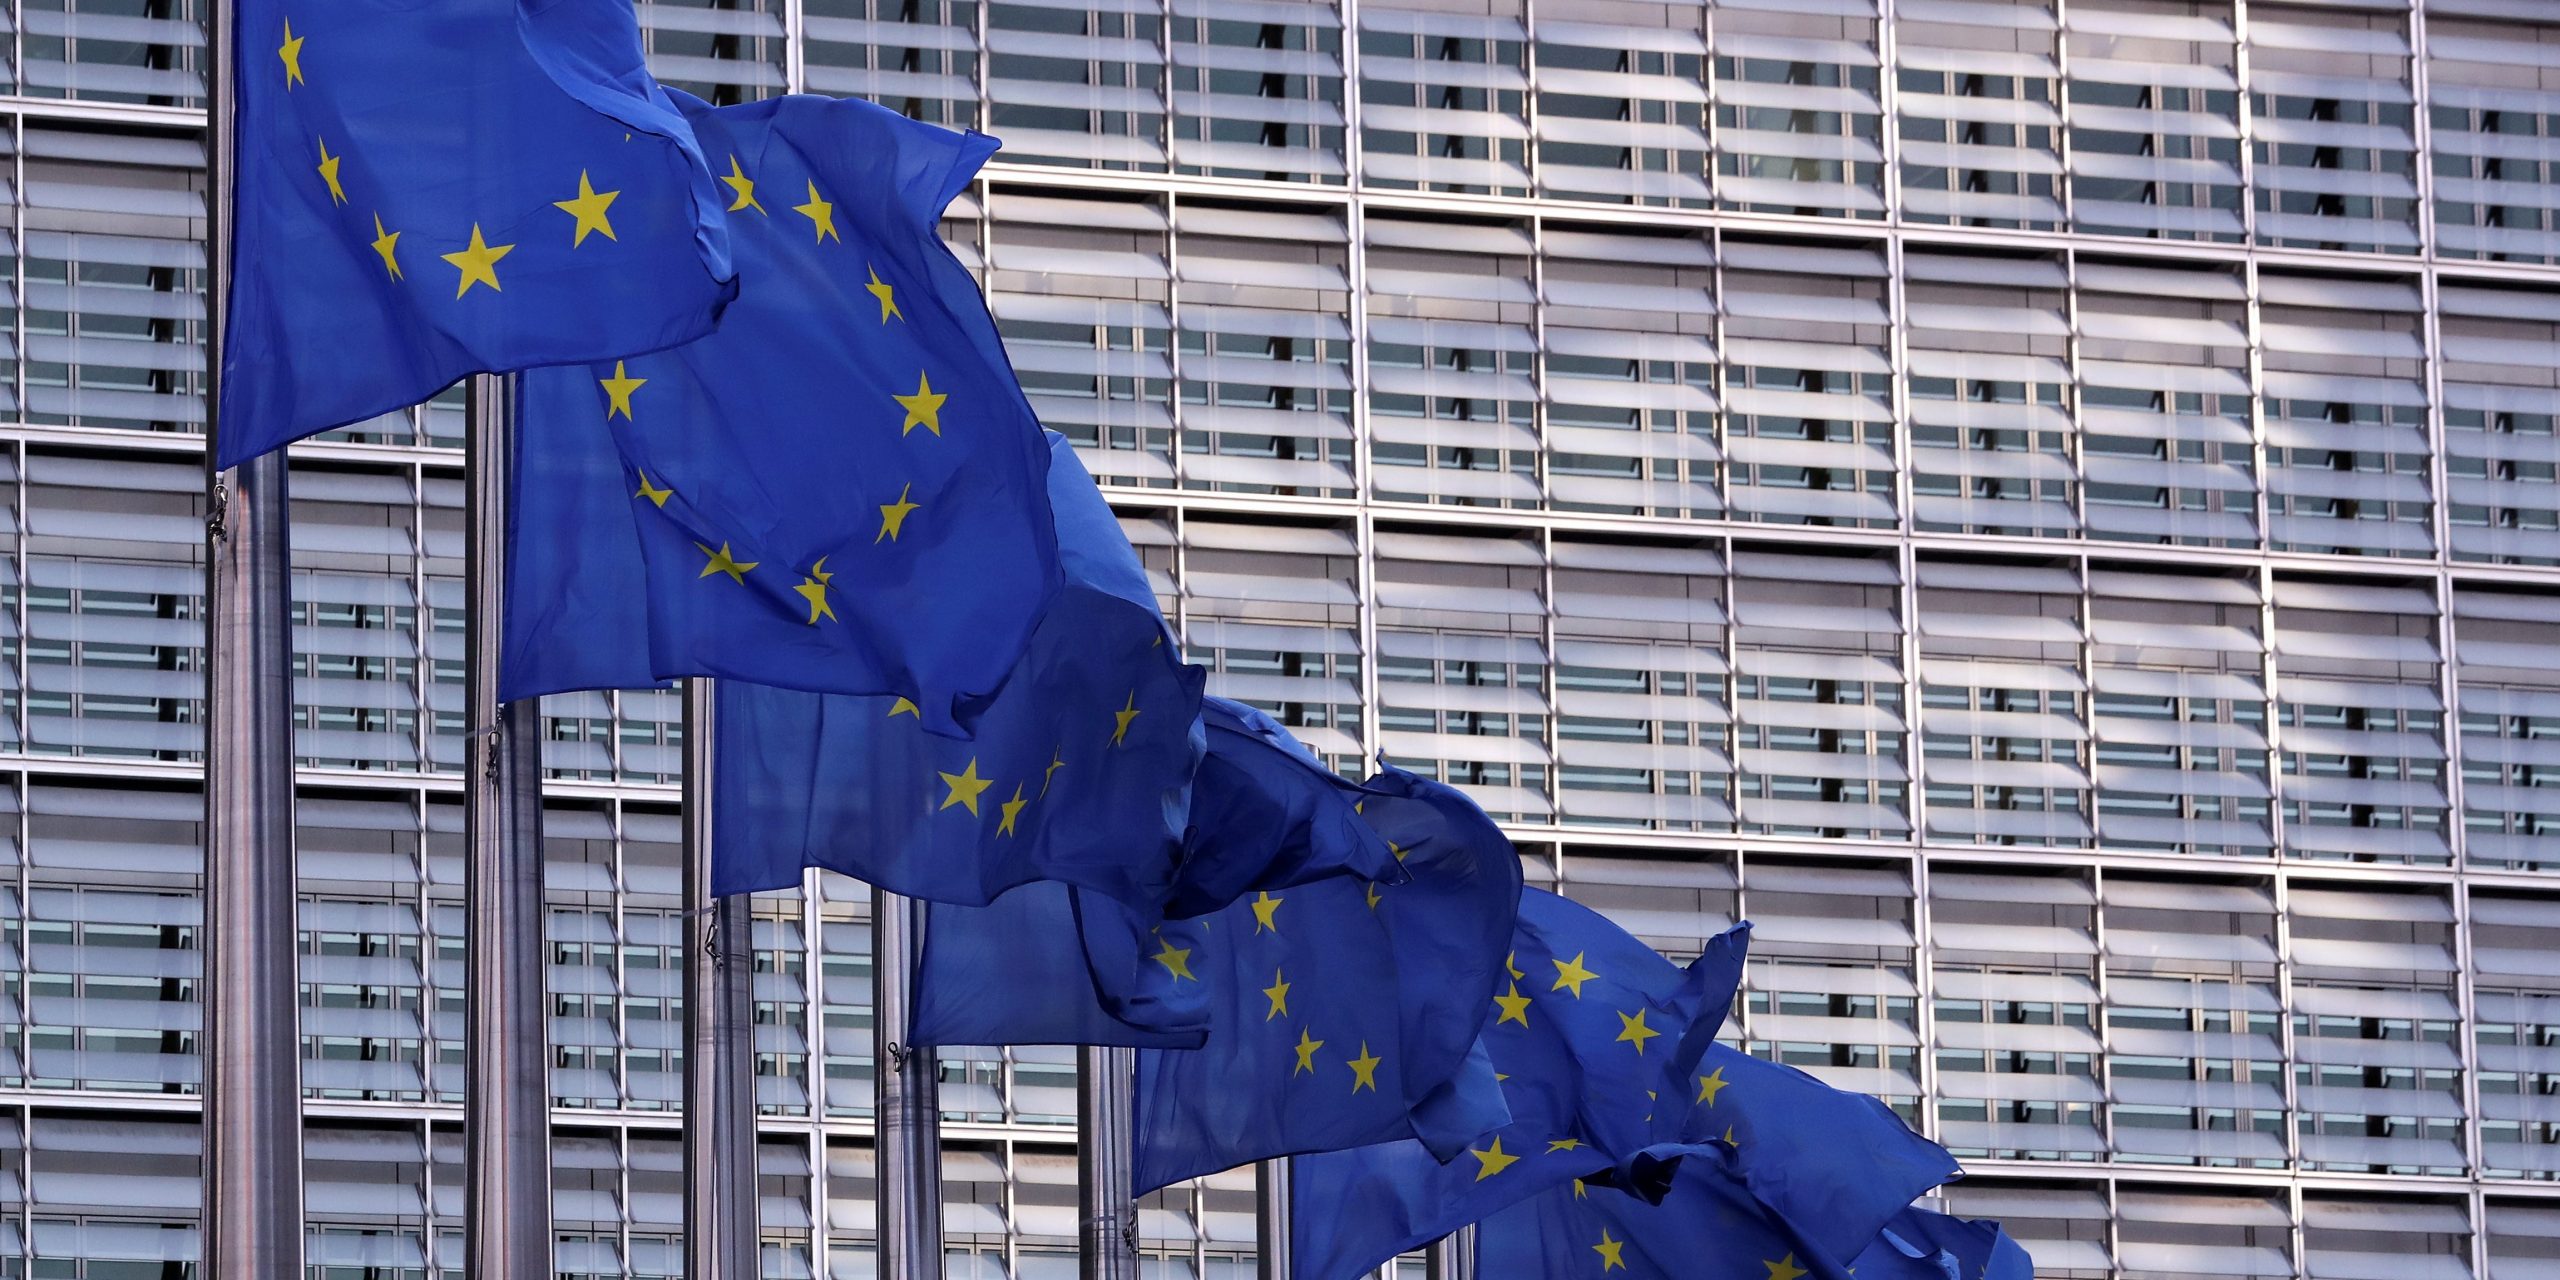 FILE PHOTO: European Union flags fly outside the European Commission headquarters in Brussels, Belgium, February 19, 2020. Picture taken February 19, 2020 REUTERS/Yves Herman